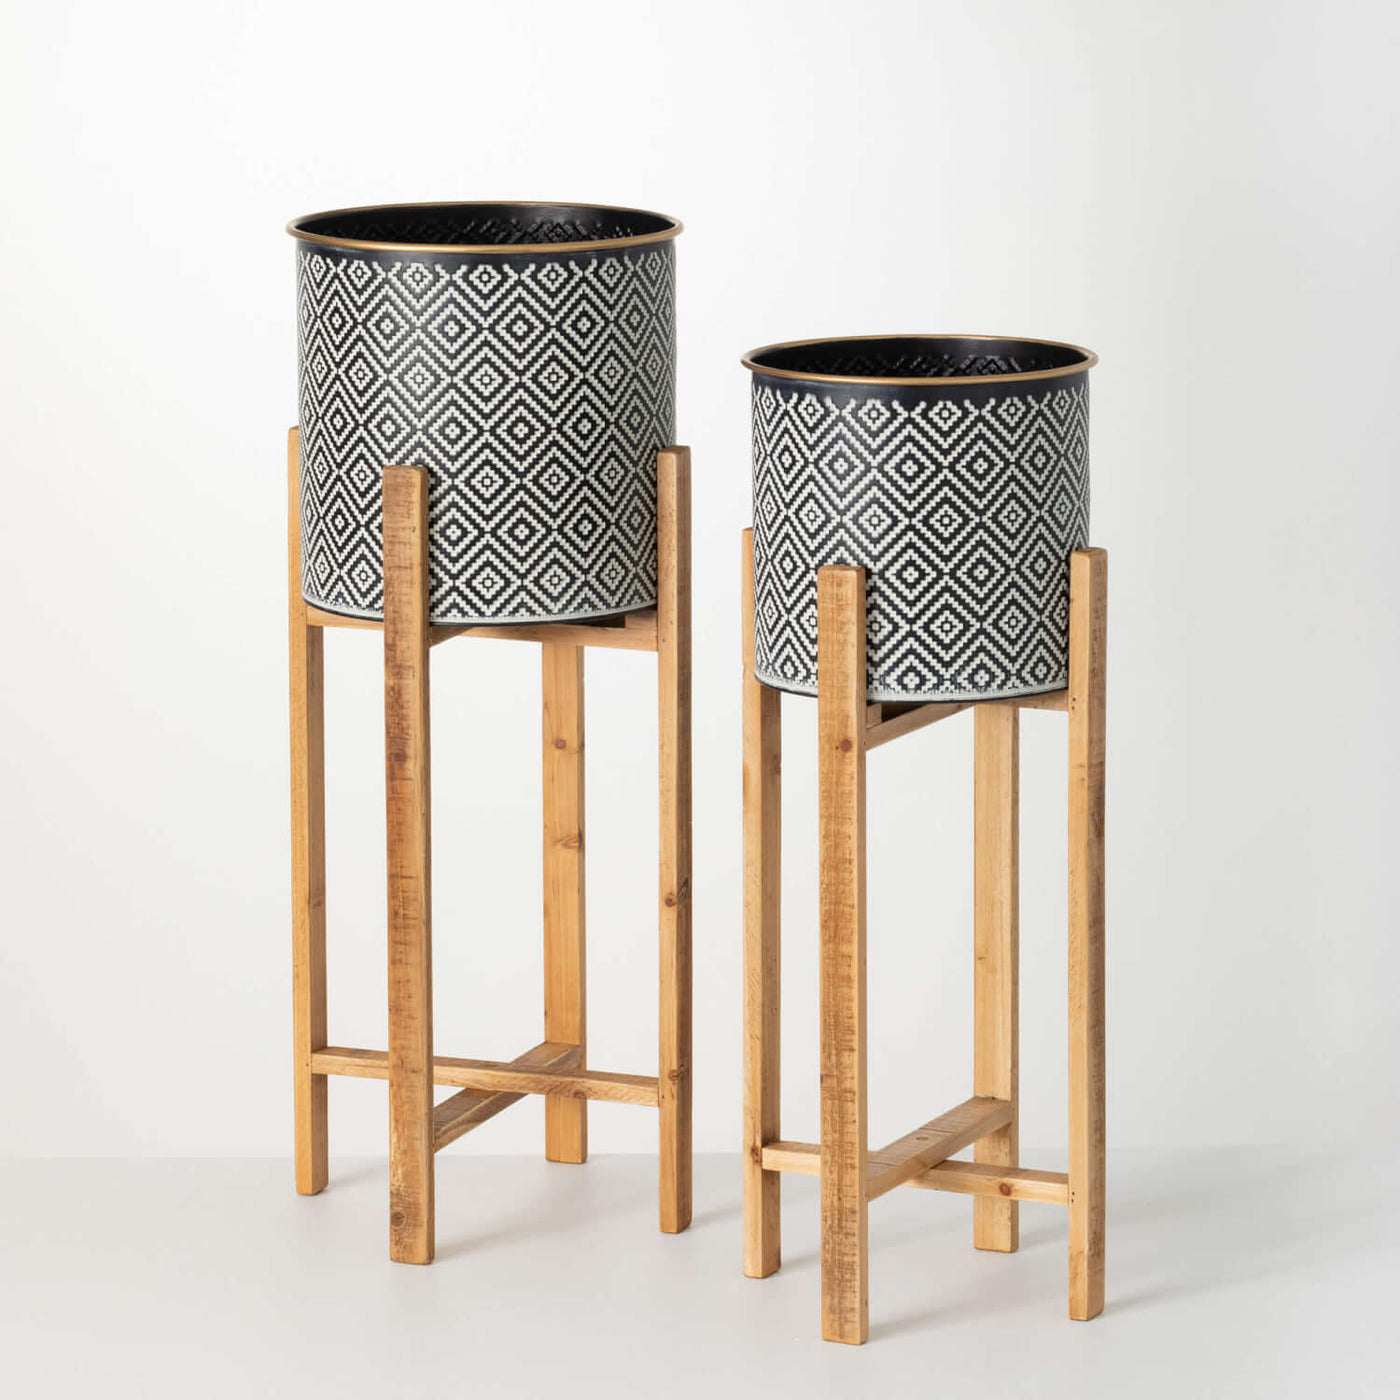 Black and white patterned metal planters on wooden stands